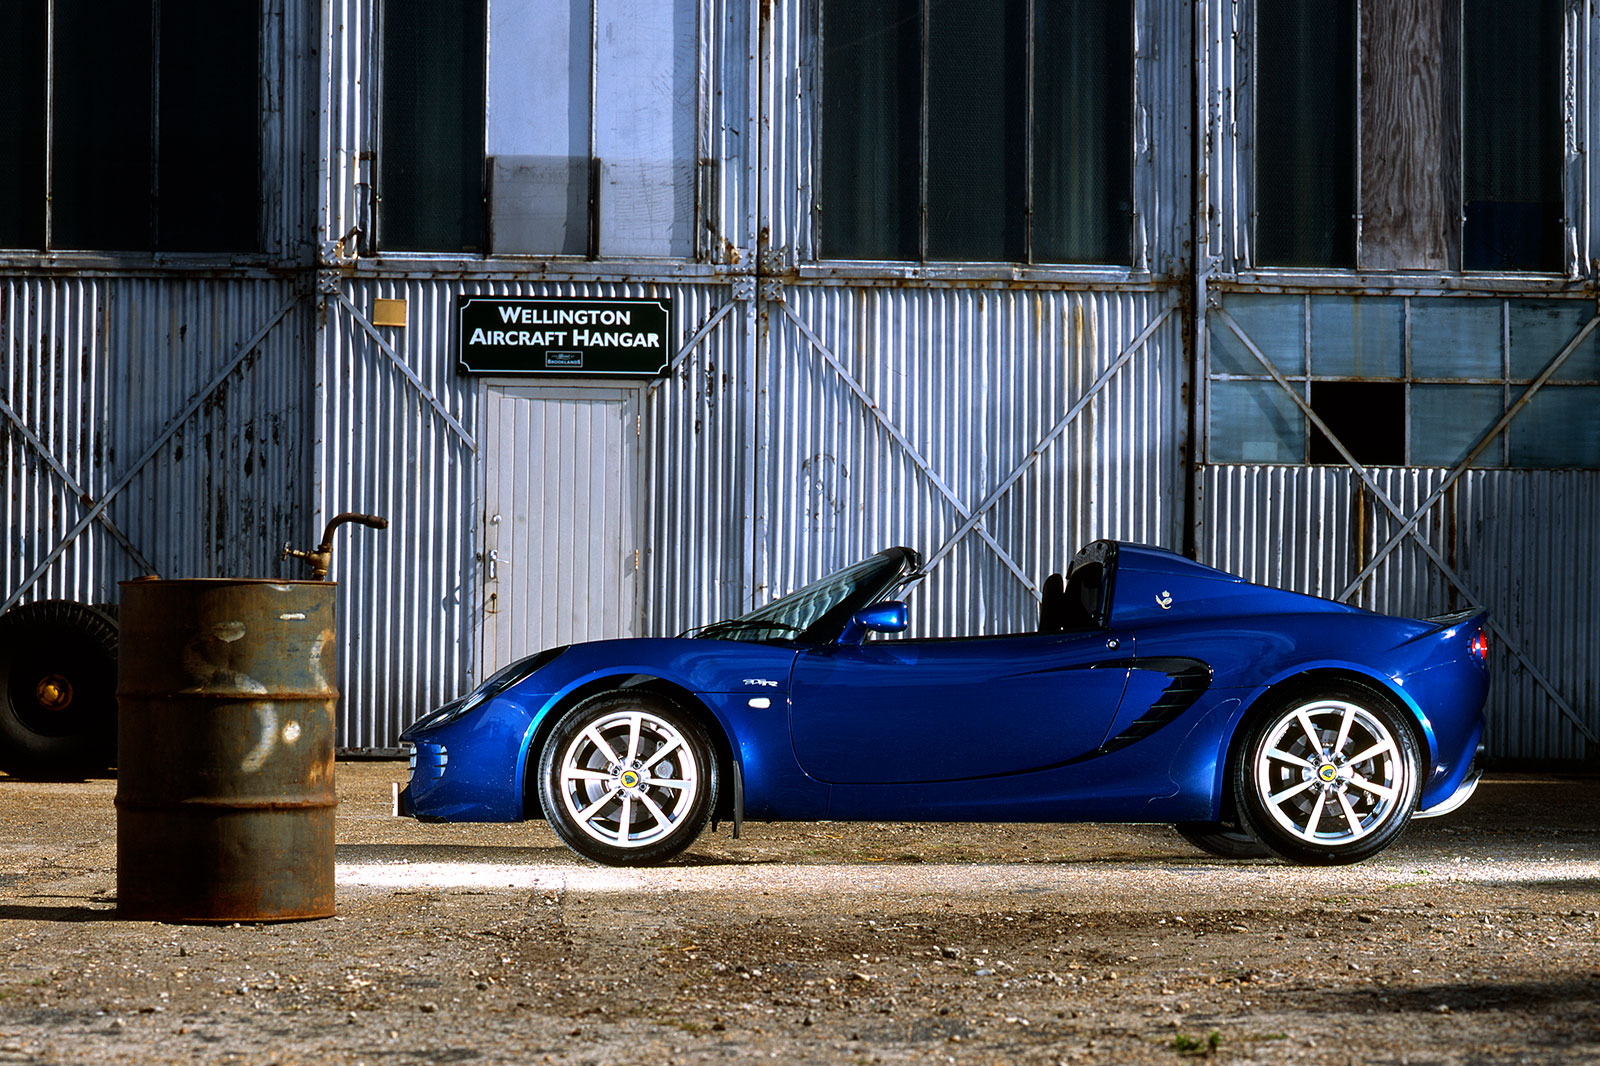 <p>In a roll call of significant models from Lotus, the Elise more than any other deserves its place at the top of the list. Not only did it keep the firm from buckling financially, it introduced a whole new generation to the delights of lightweight, deft-footed sports car ownership.</p><p>However, considering Lotus expects to be selling <strong>150,000 cars every year</strong> by 2028, it's safe to say it won't be long until the Electre SUV eclipses that figure.</p>